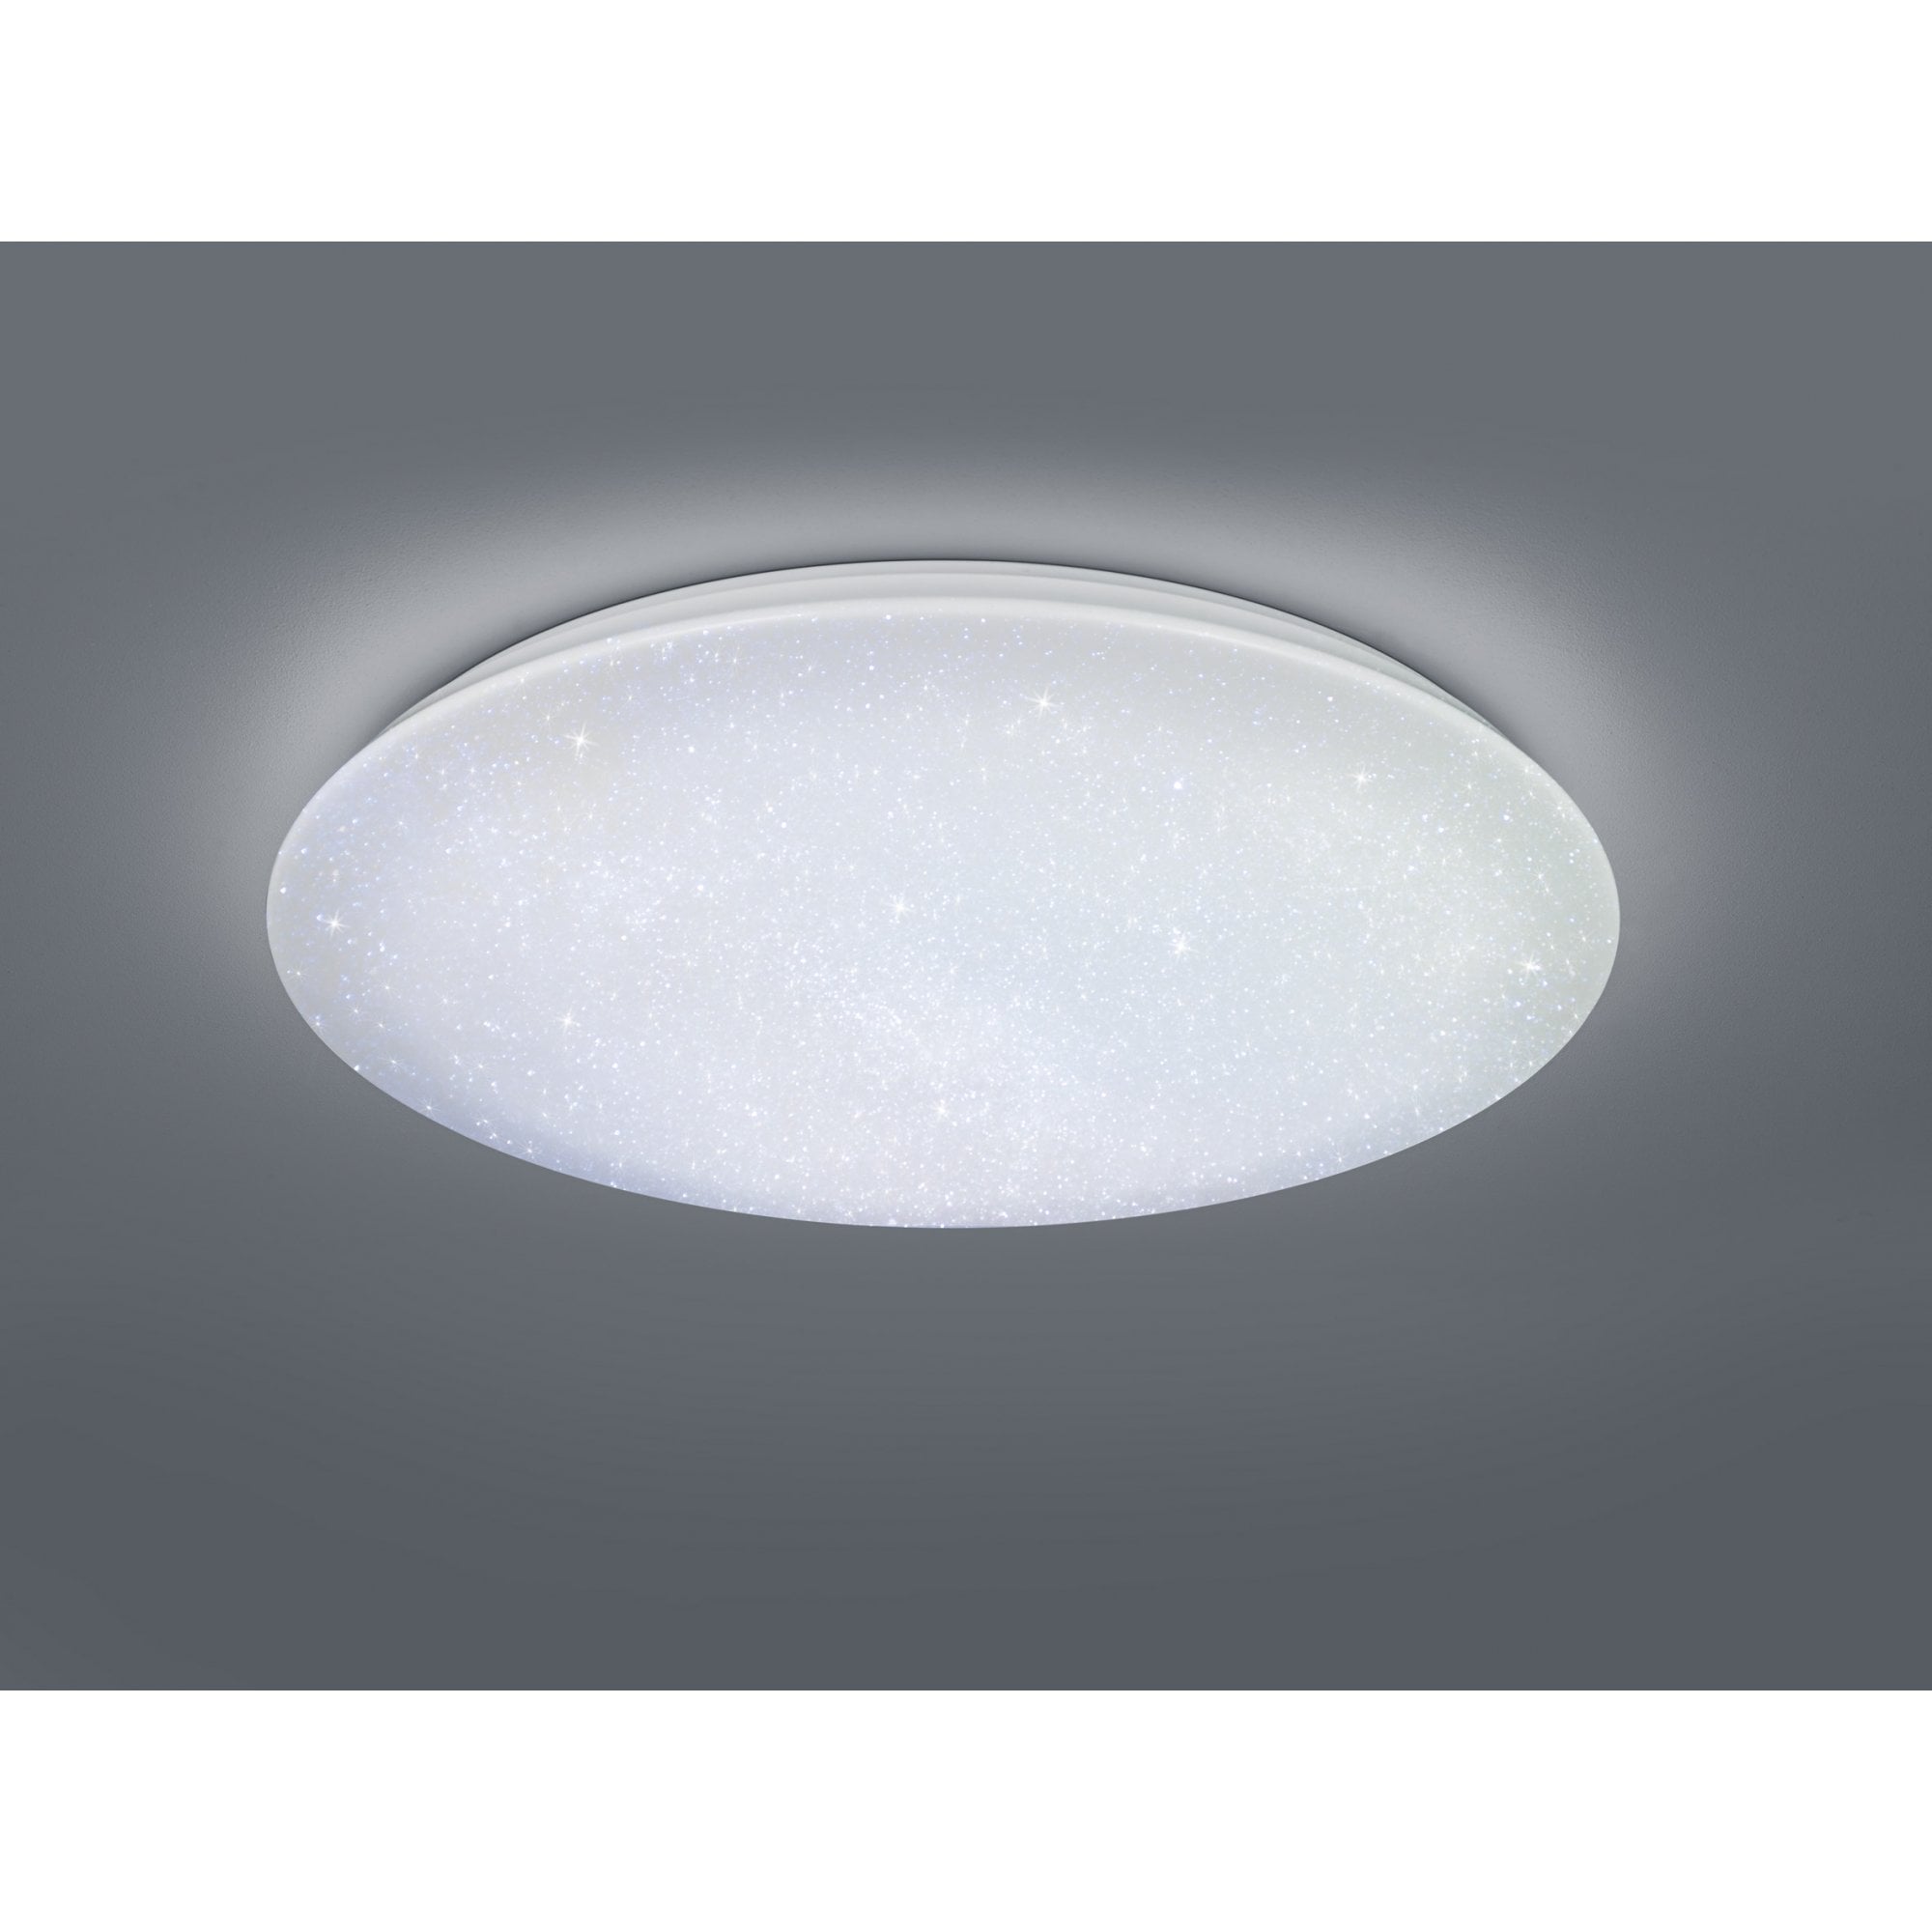 Nagano Modern Twinkle Effect Remote Control LED Ceiling Light